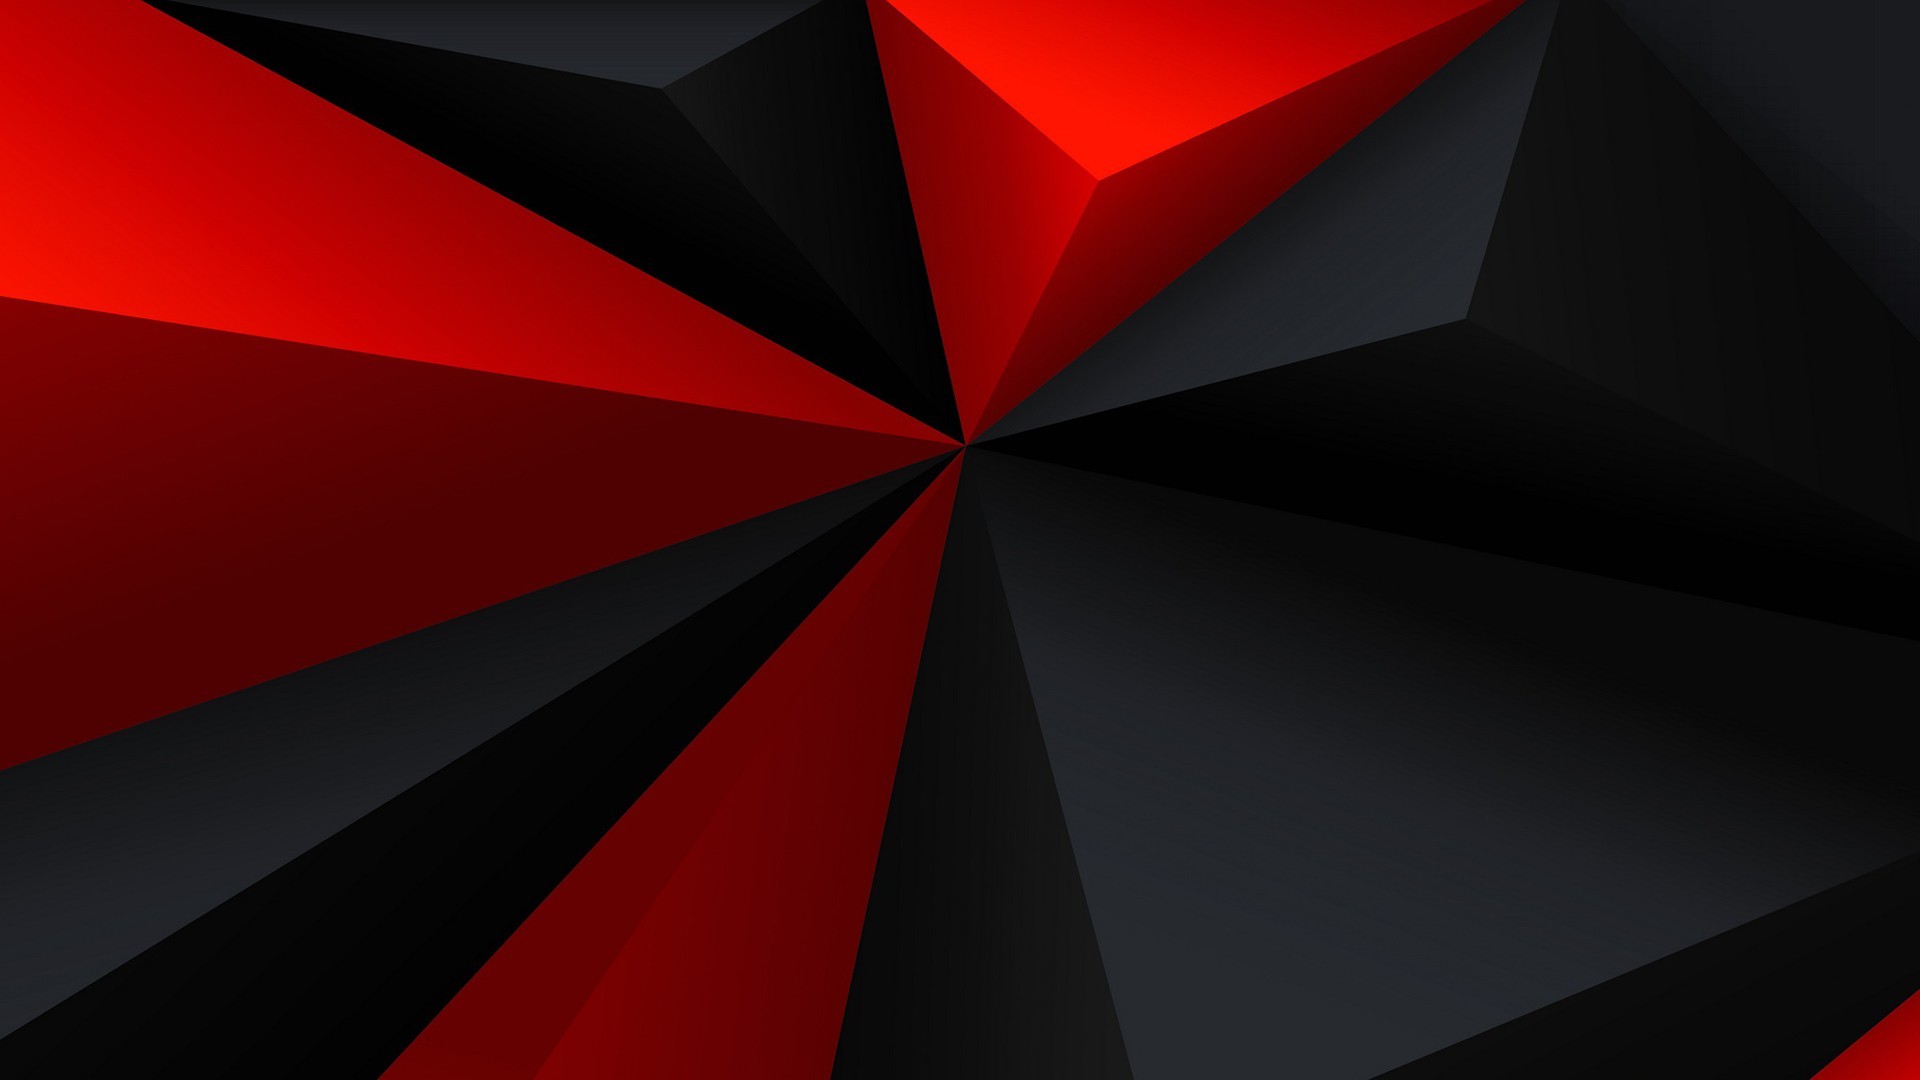 1920x1080 General  digital art minimalism low poly geometry triangle red  black gray abstract